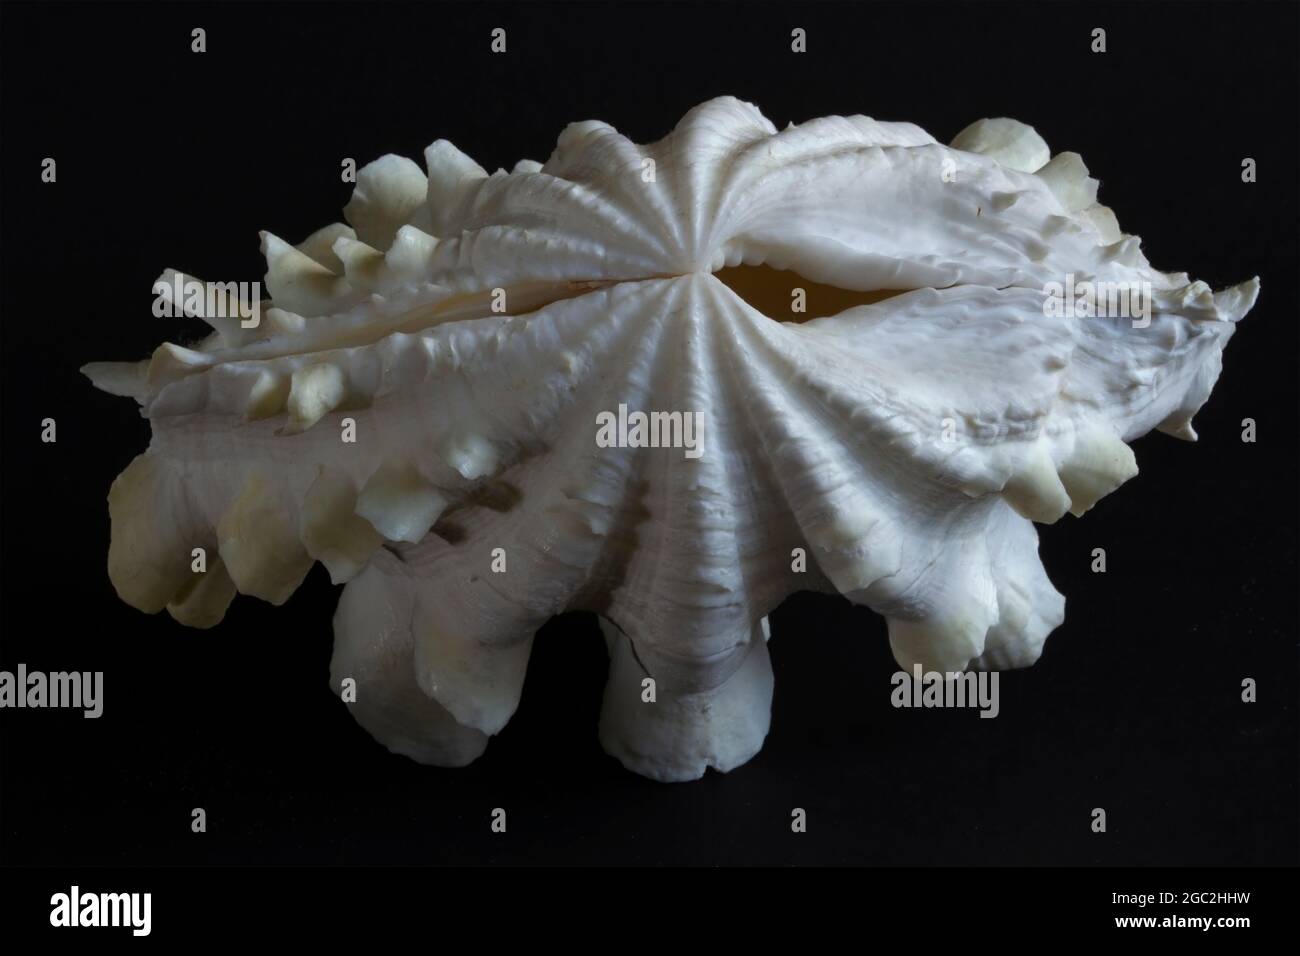 One of only two species of Giant Clams found in the Western Indian Ocean, the Fluted Giant Clam has distinctive scutes between large ribs. Stock Photo